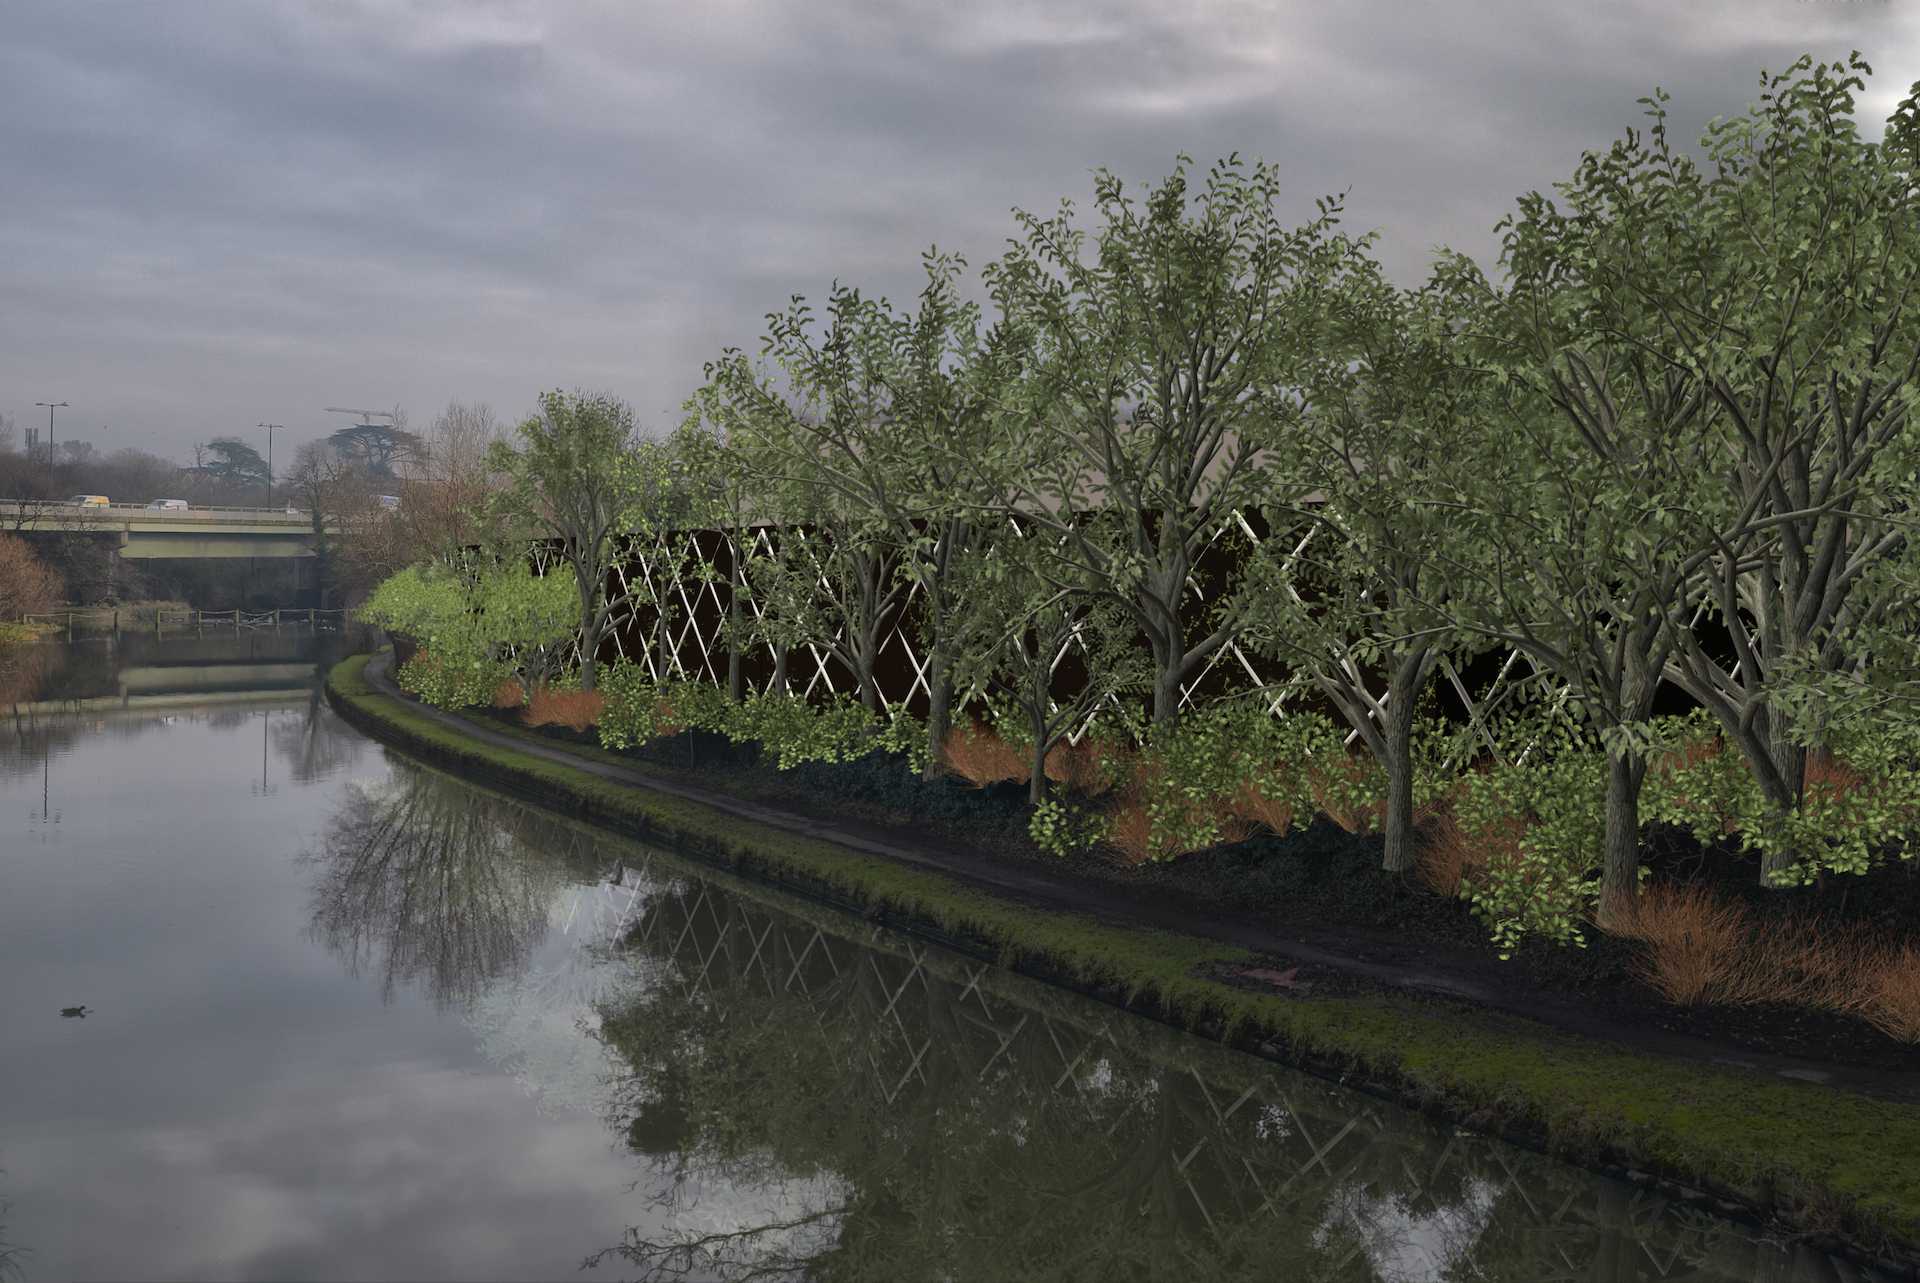 Visualisation of new fence and planting scheme alongside the canal.